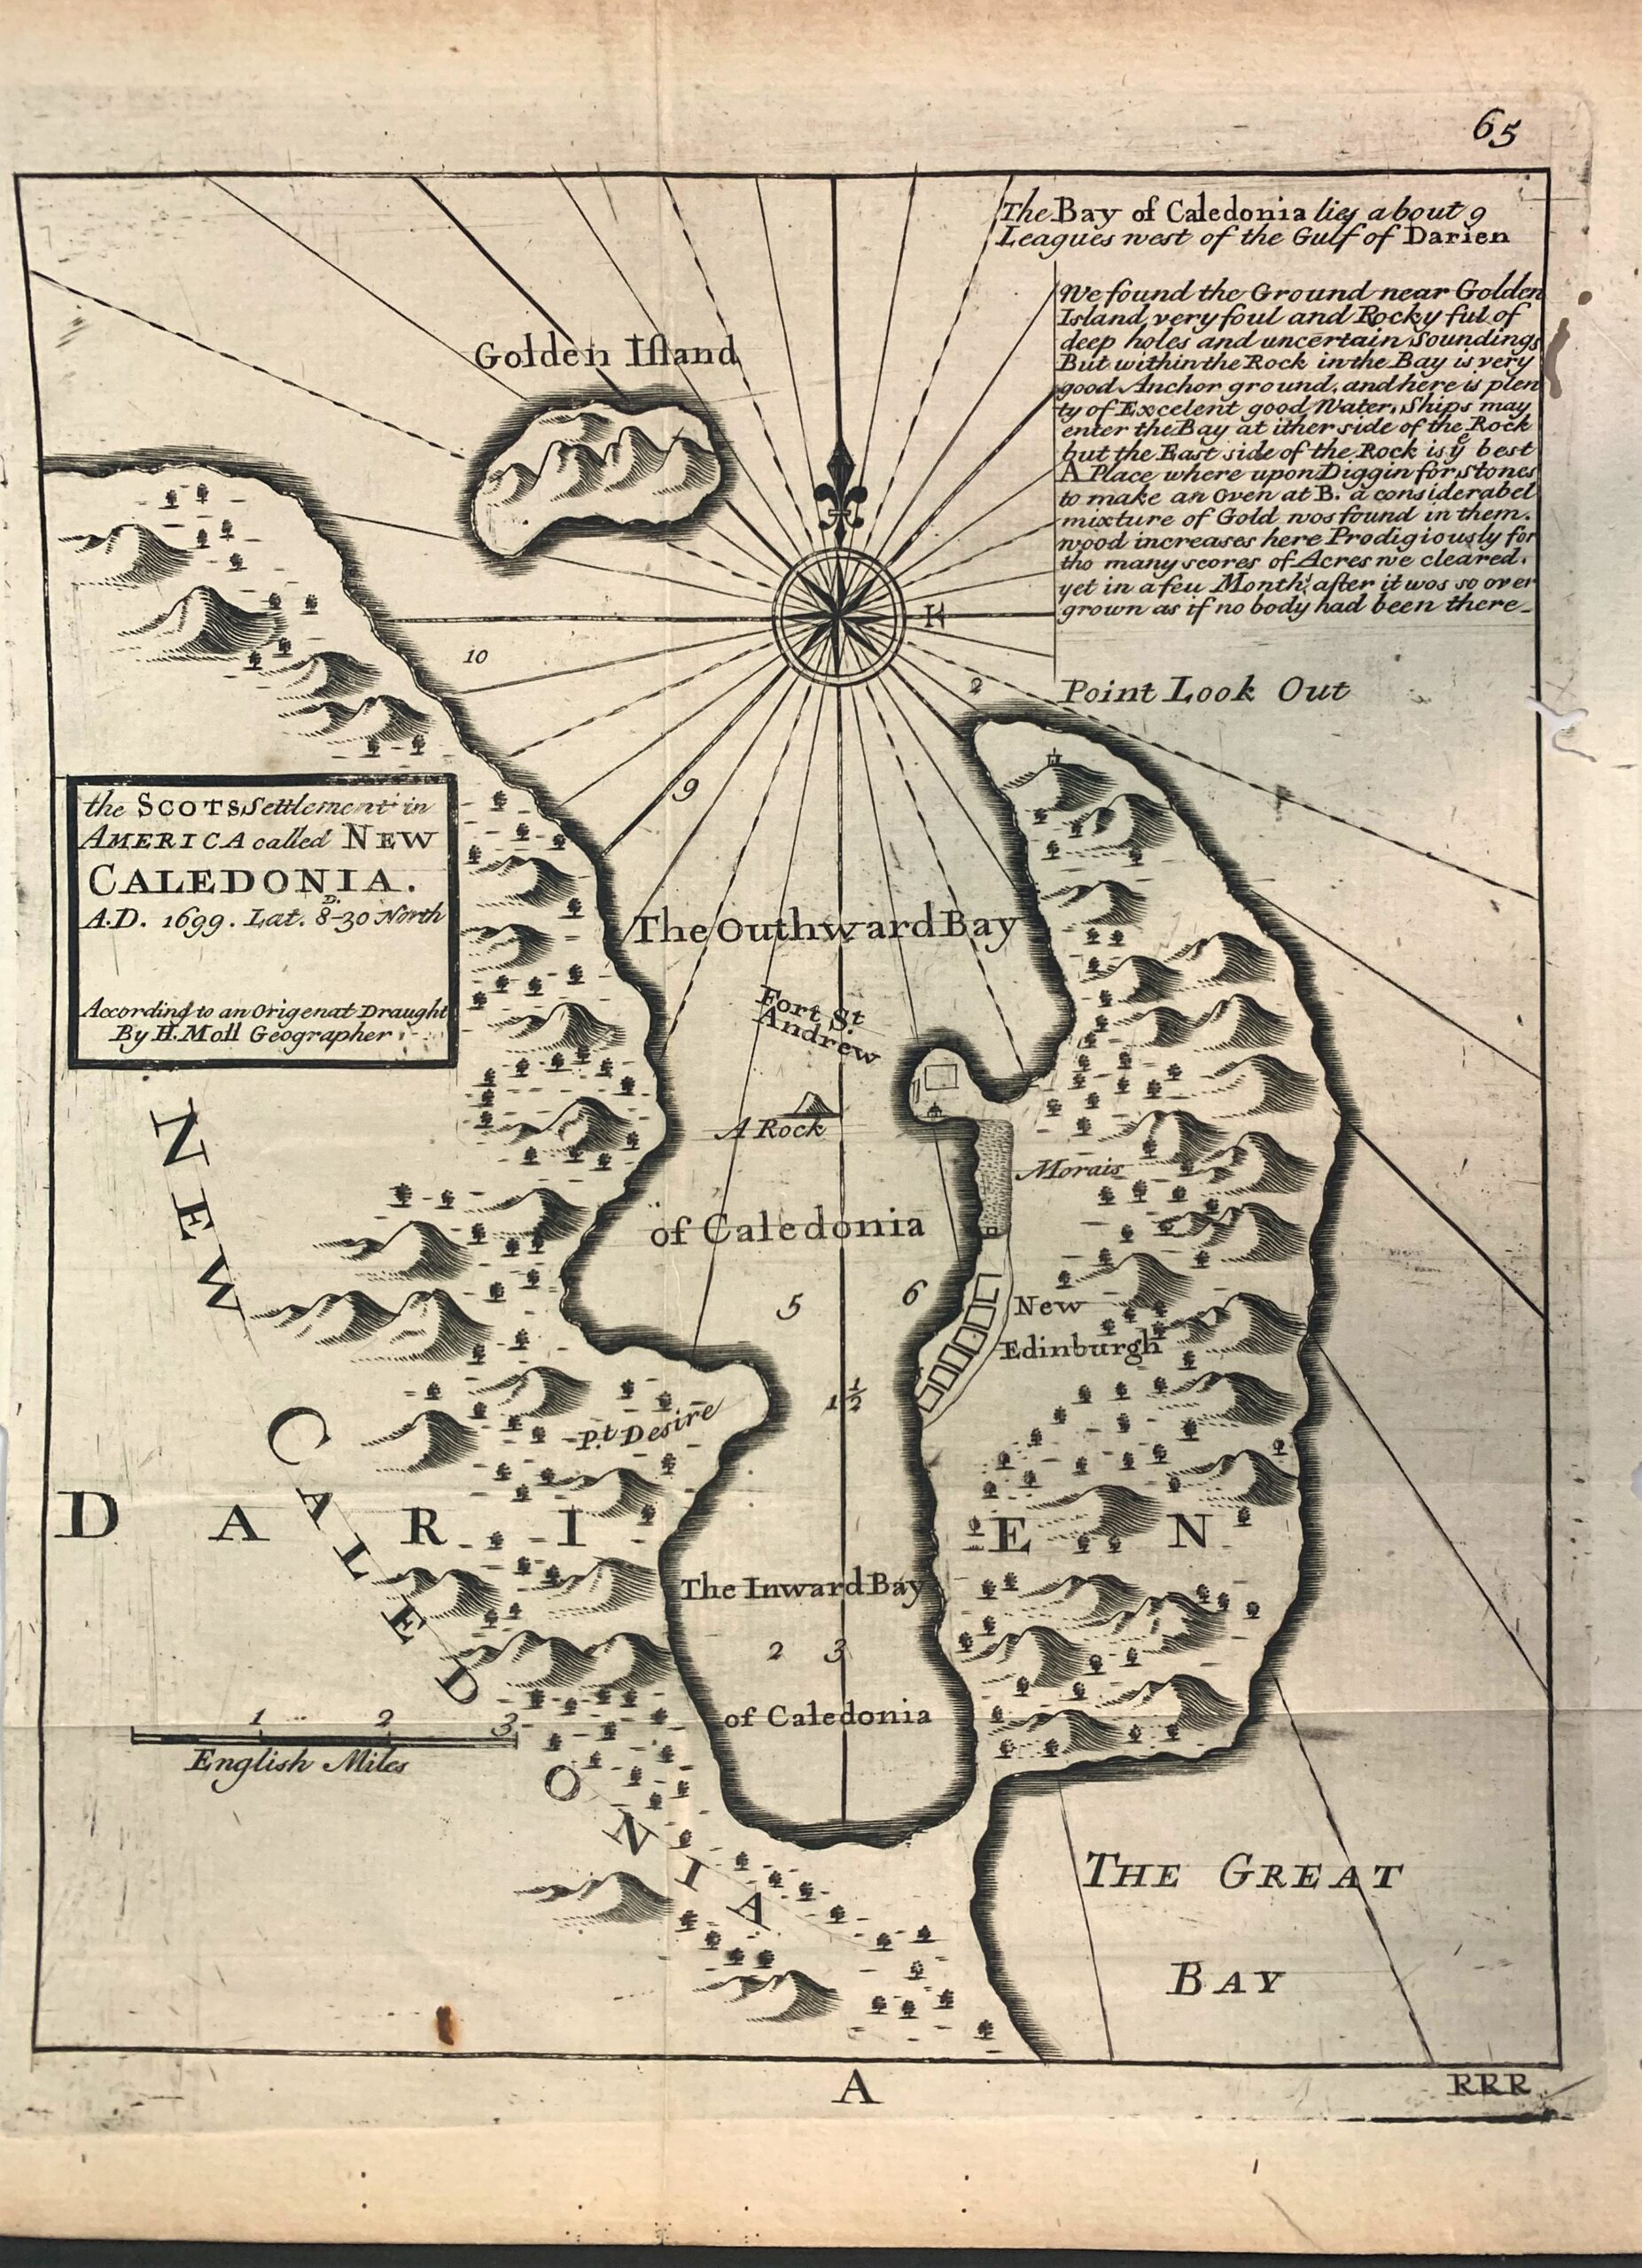 The scots settlement in America called New Caledonia